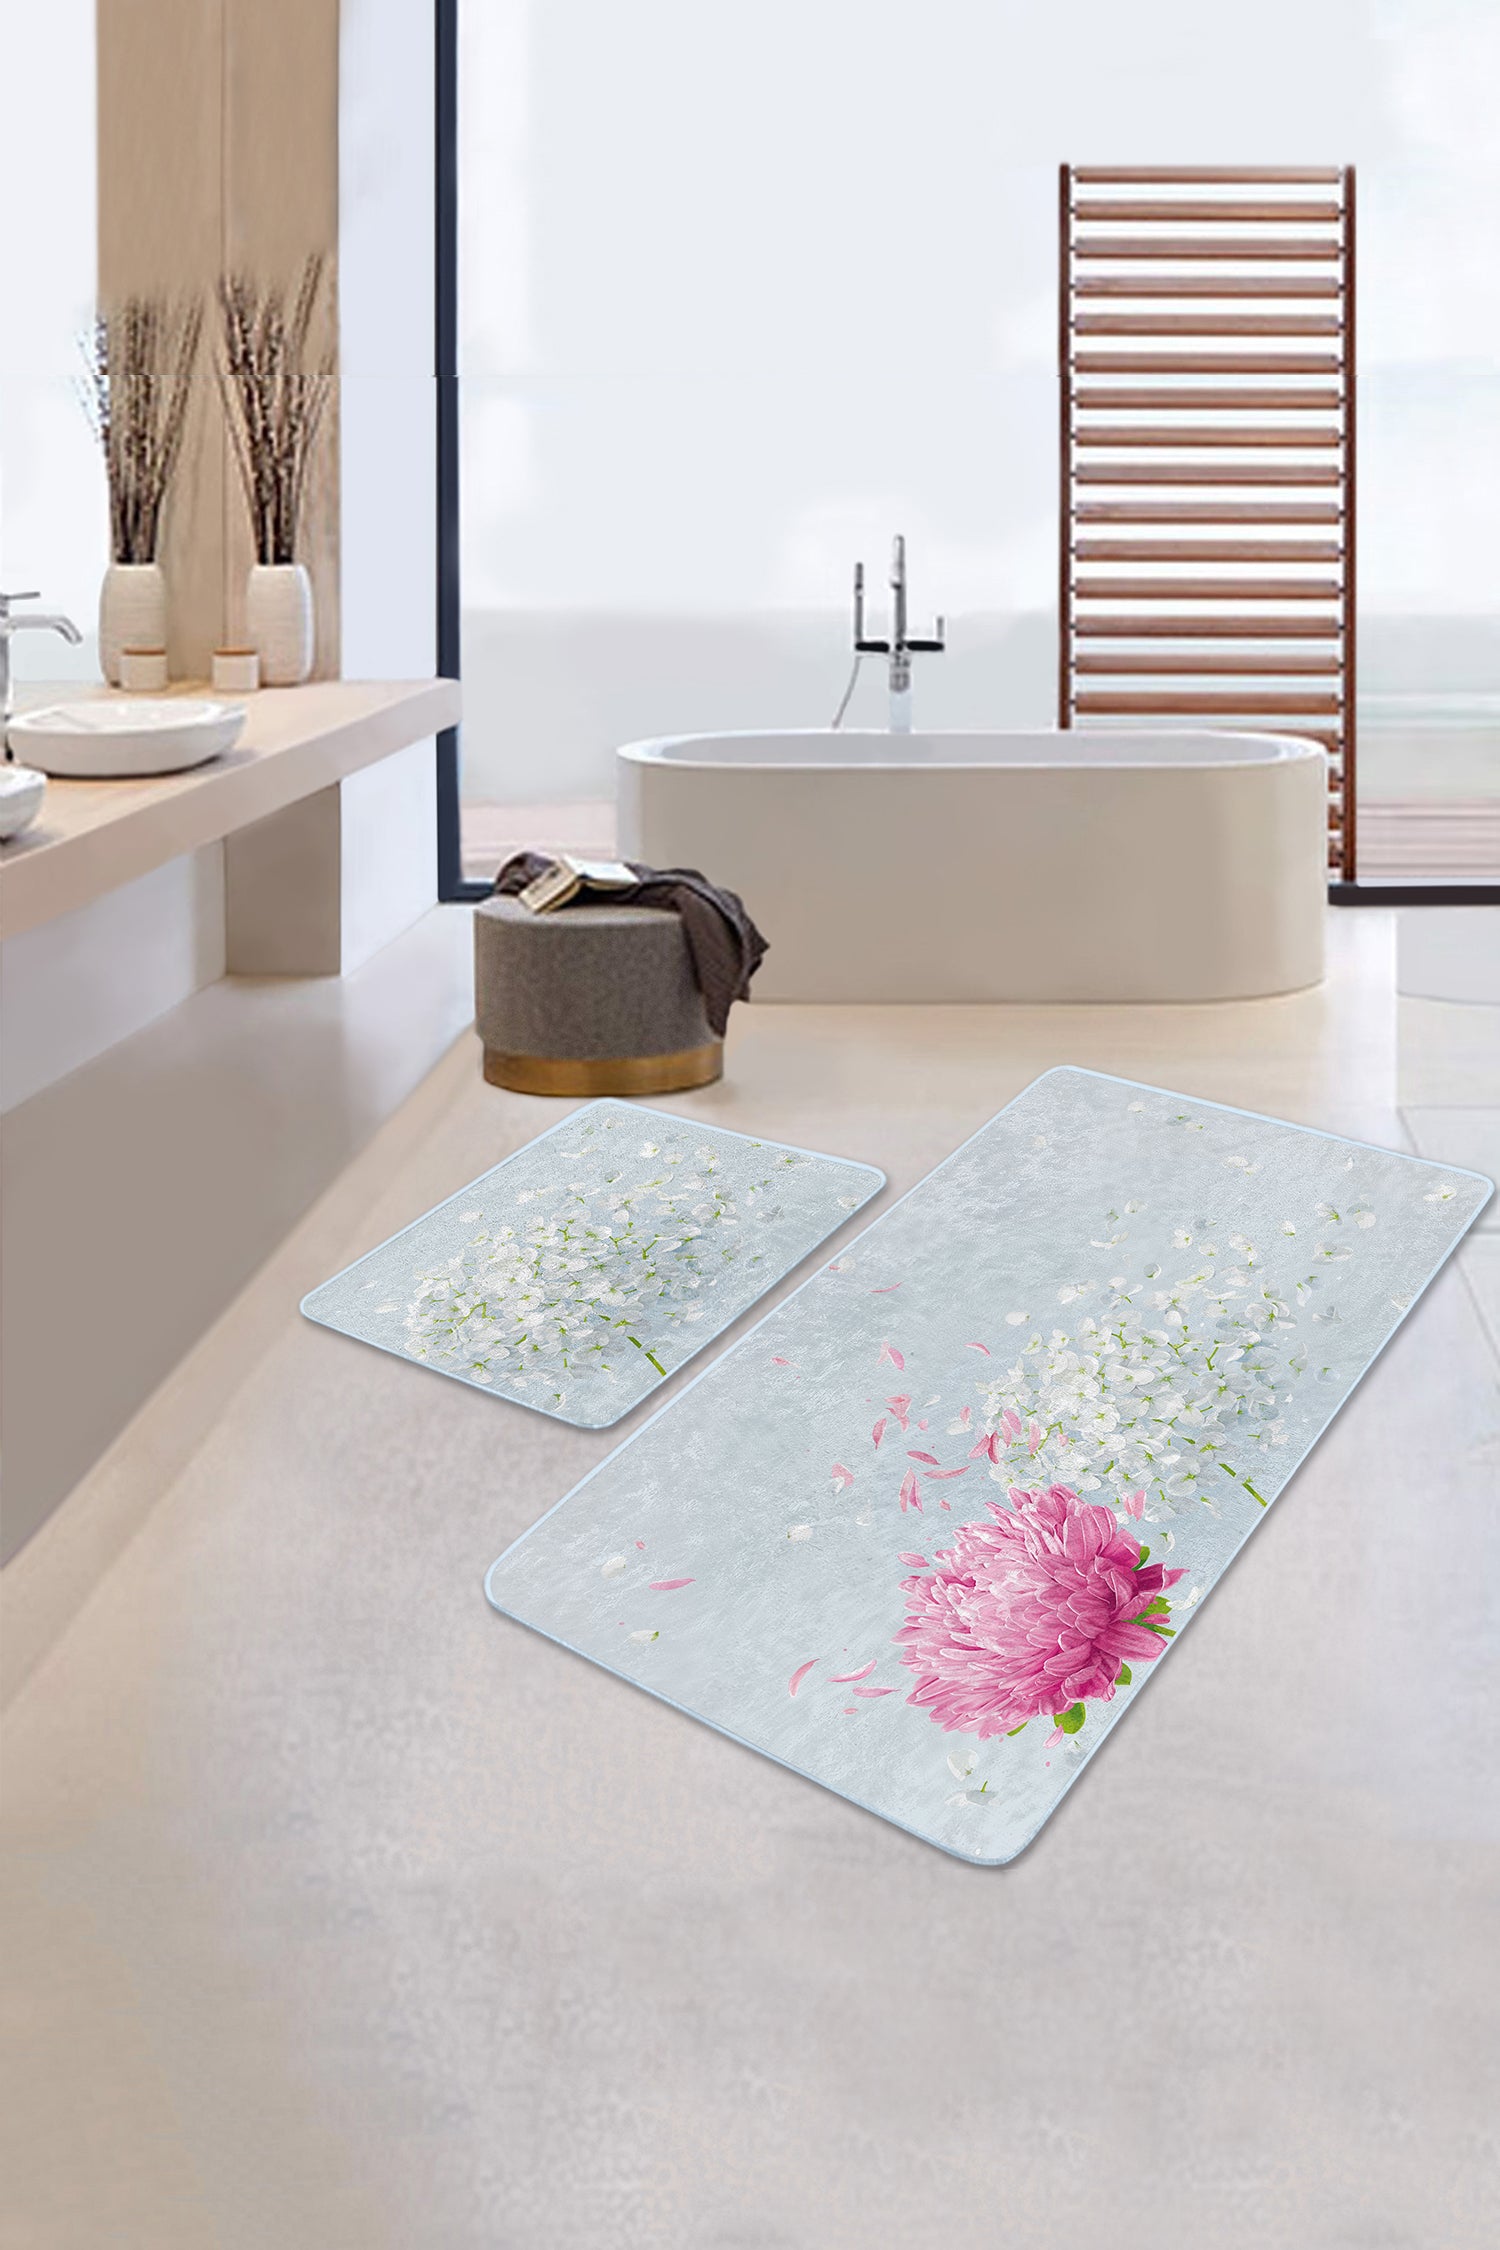 Decorative Bath Mat Set with a Charming Array of Pink Flower Patterns